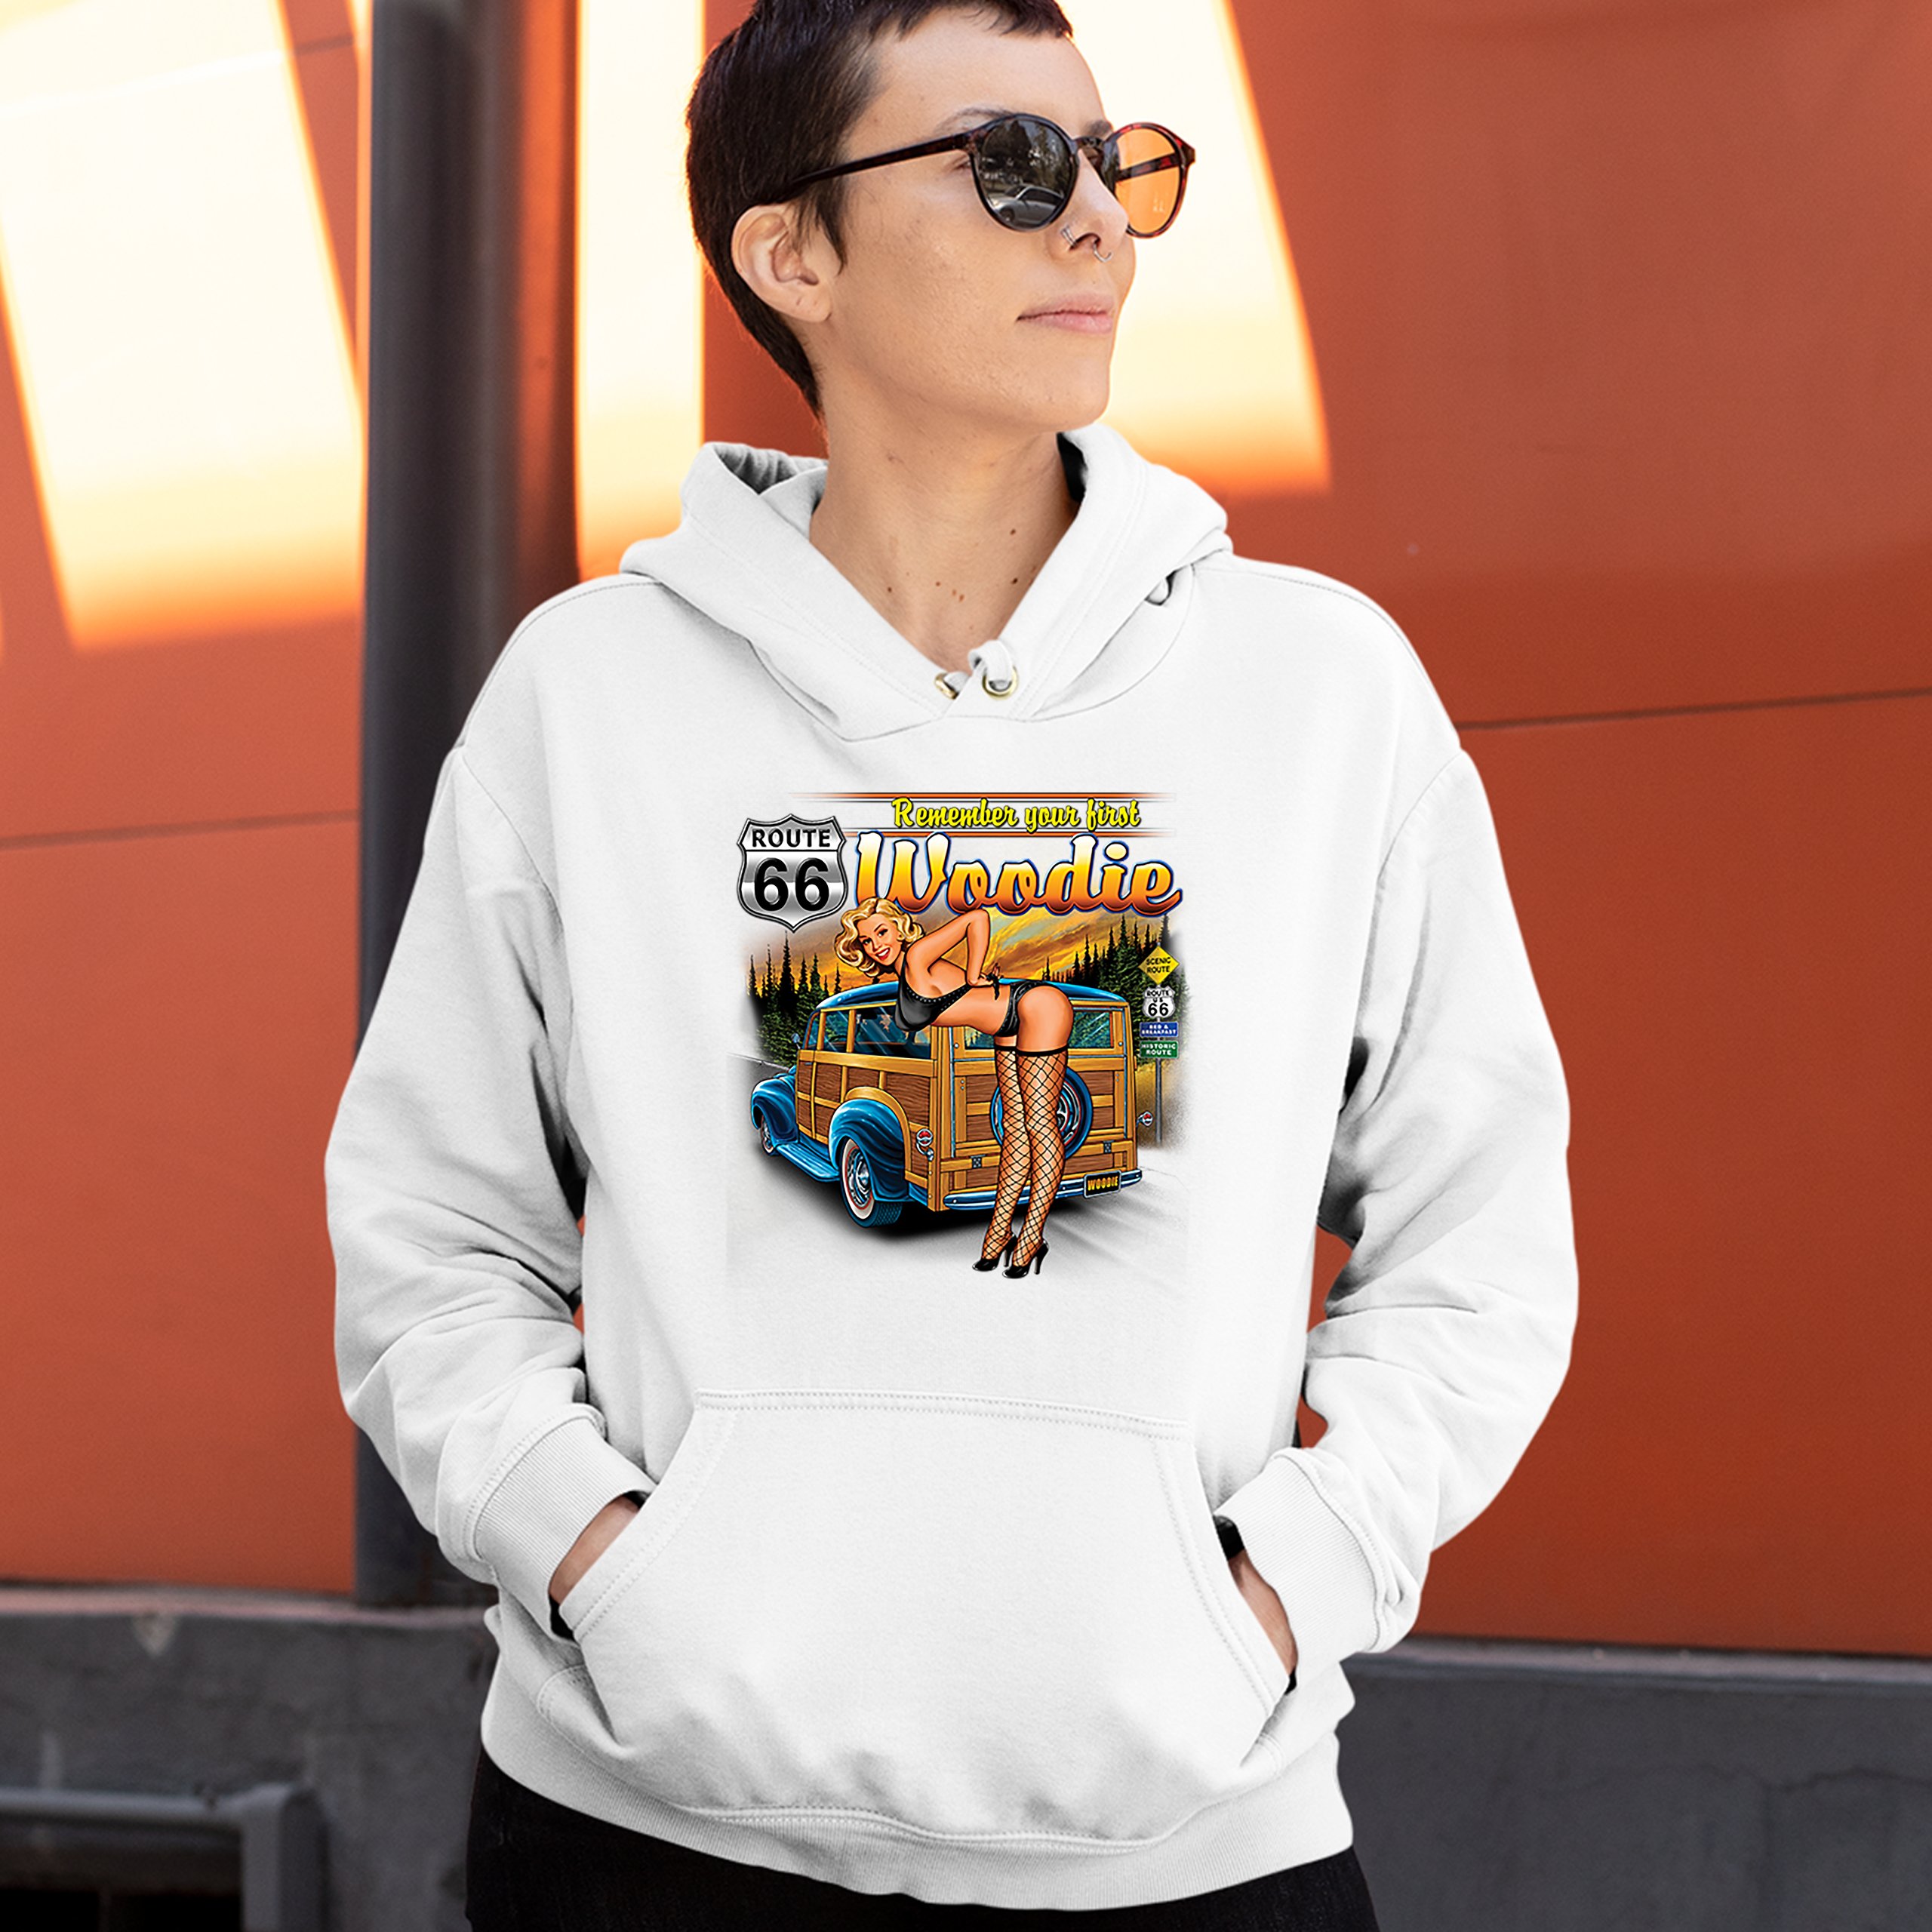 Remember Your First Woodie Sweatshirt Route 66 Sexy Pin-up Girl Hoodie ...